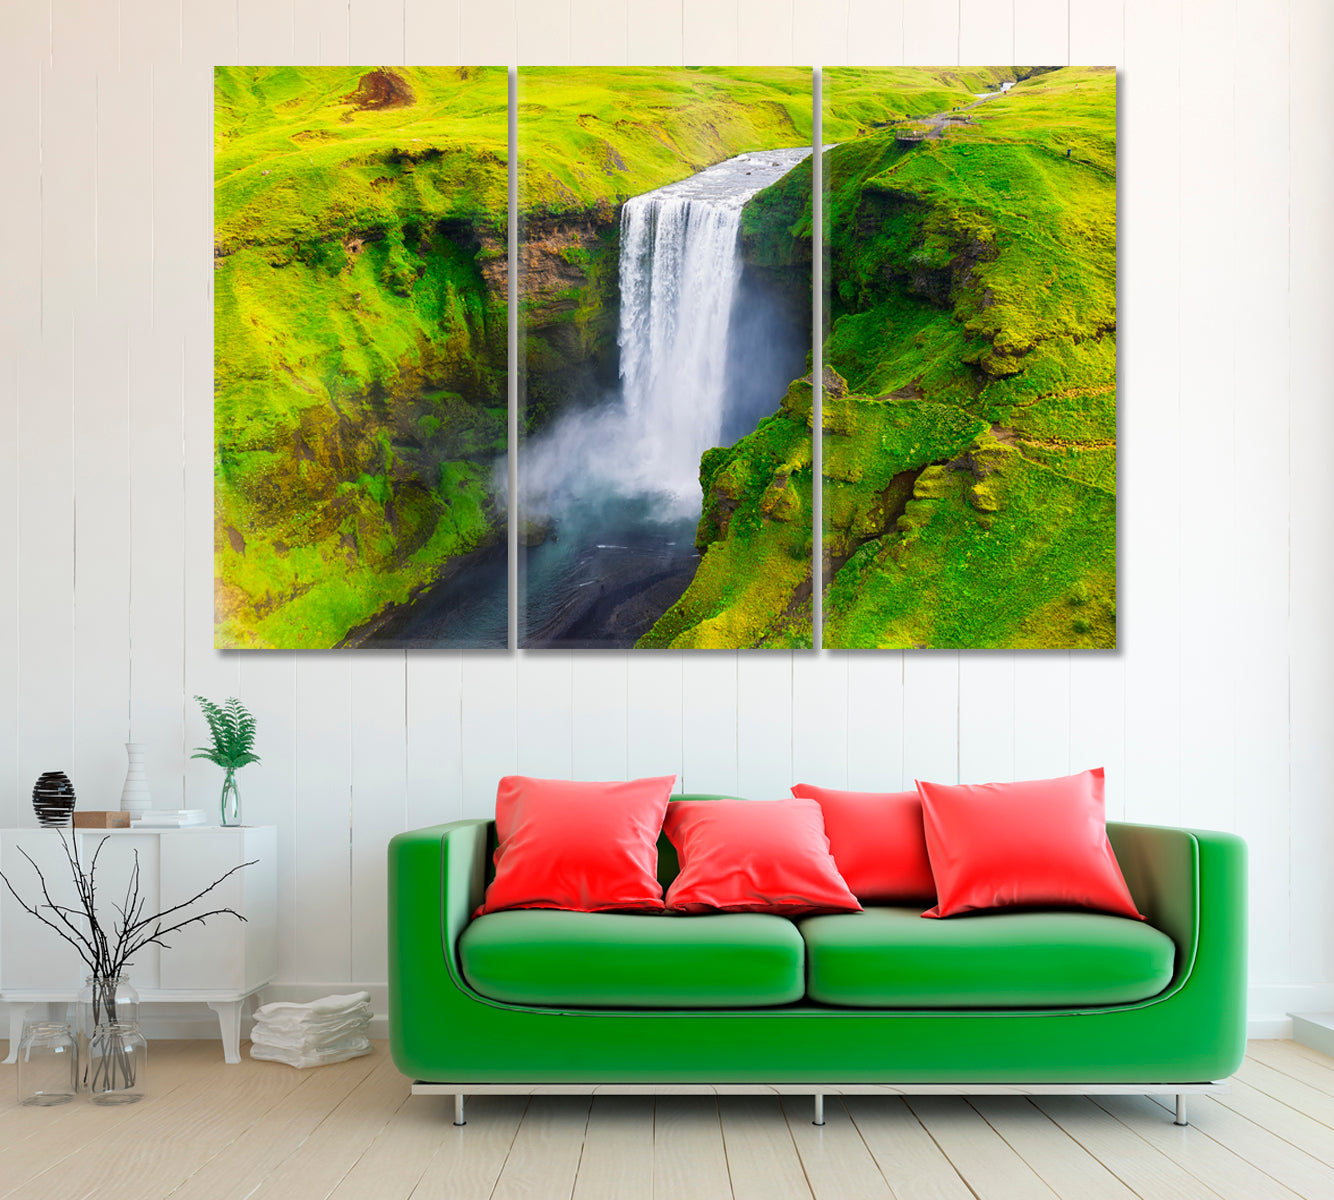 Iceland Landscape with Skogafoss Waterfall Canvas Print ArtLexy 3 Panels 36"x24" inches 